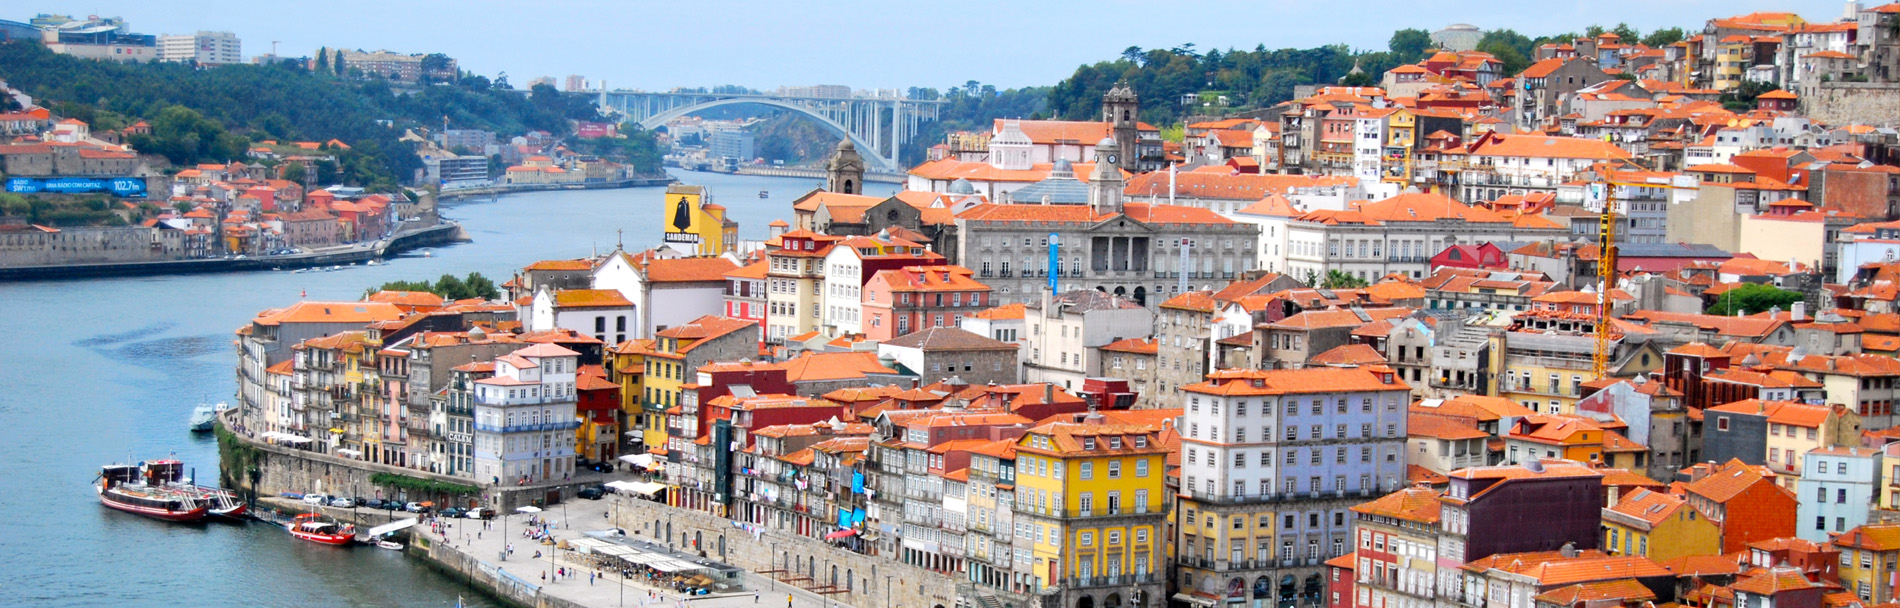 Portugal Tour Package - 3 Nights